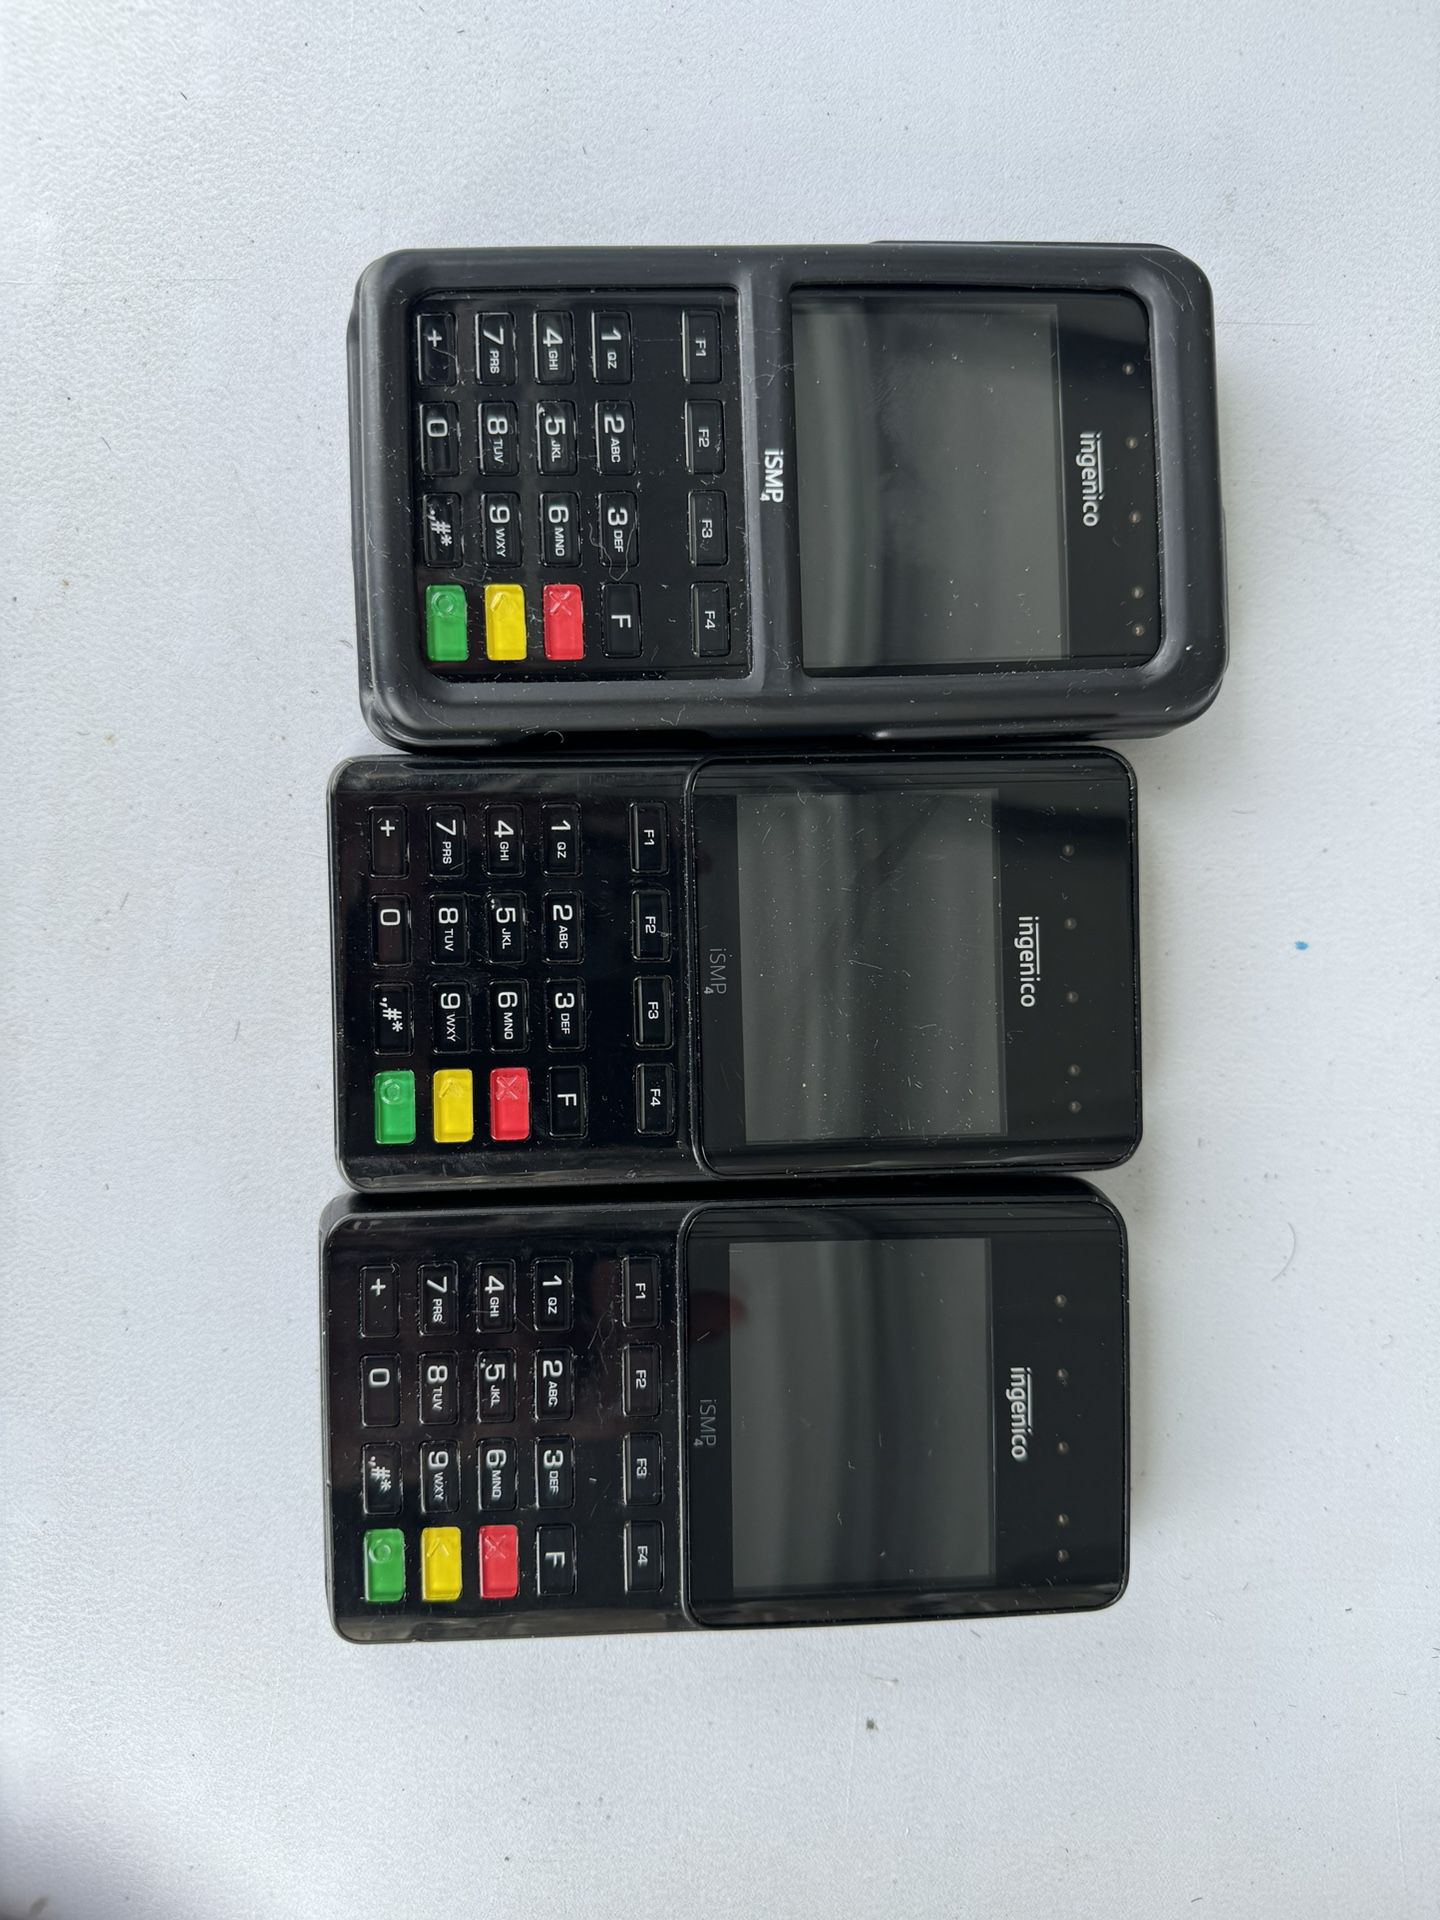 Ingenico iSMP Payment Terminal